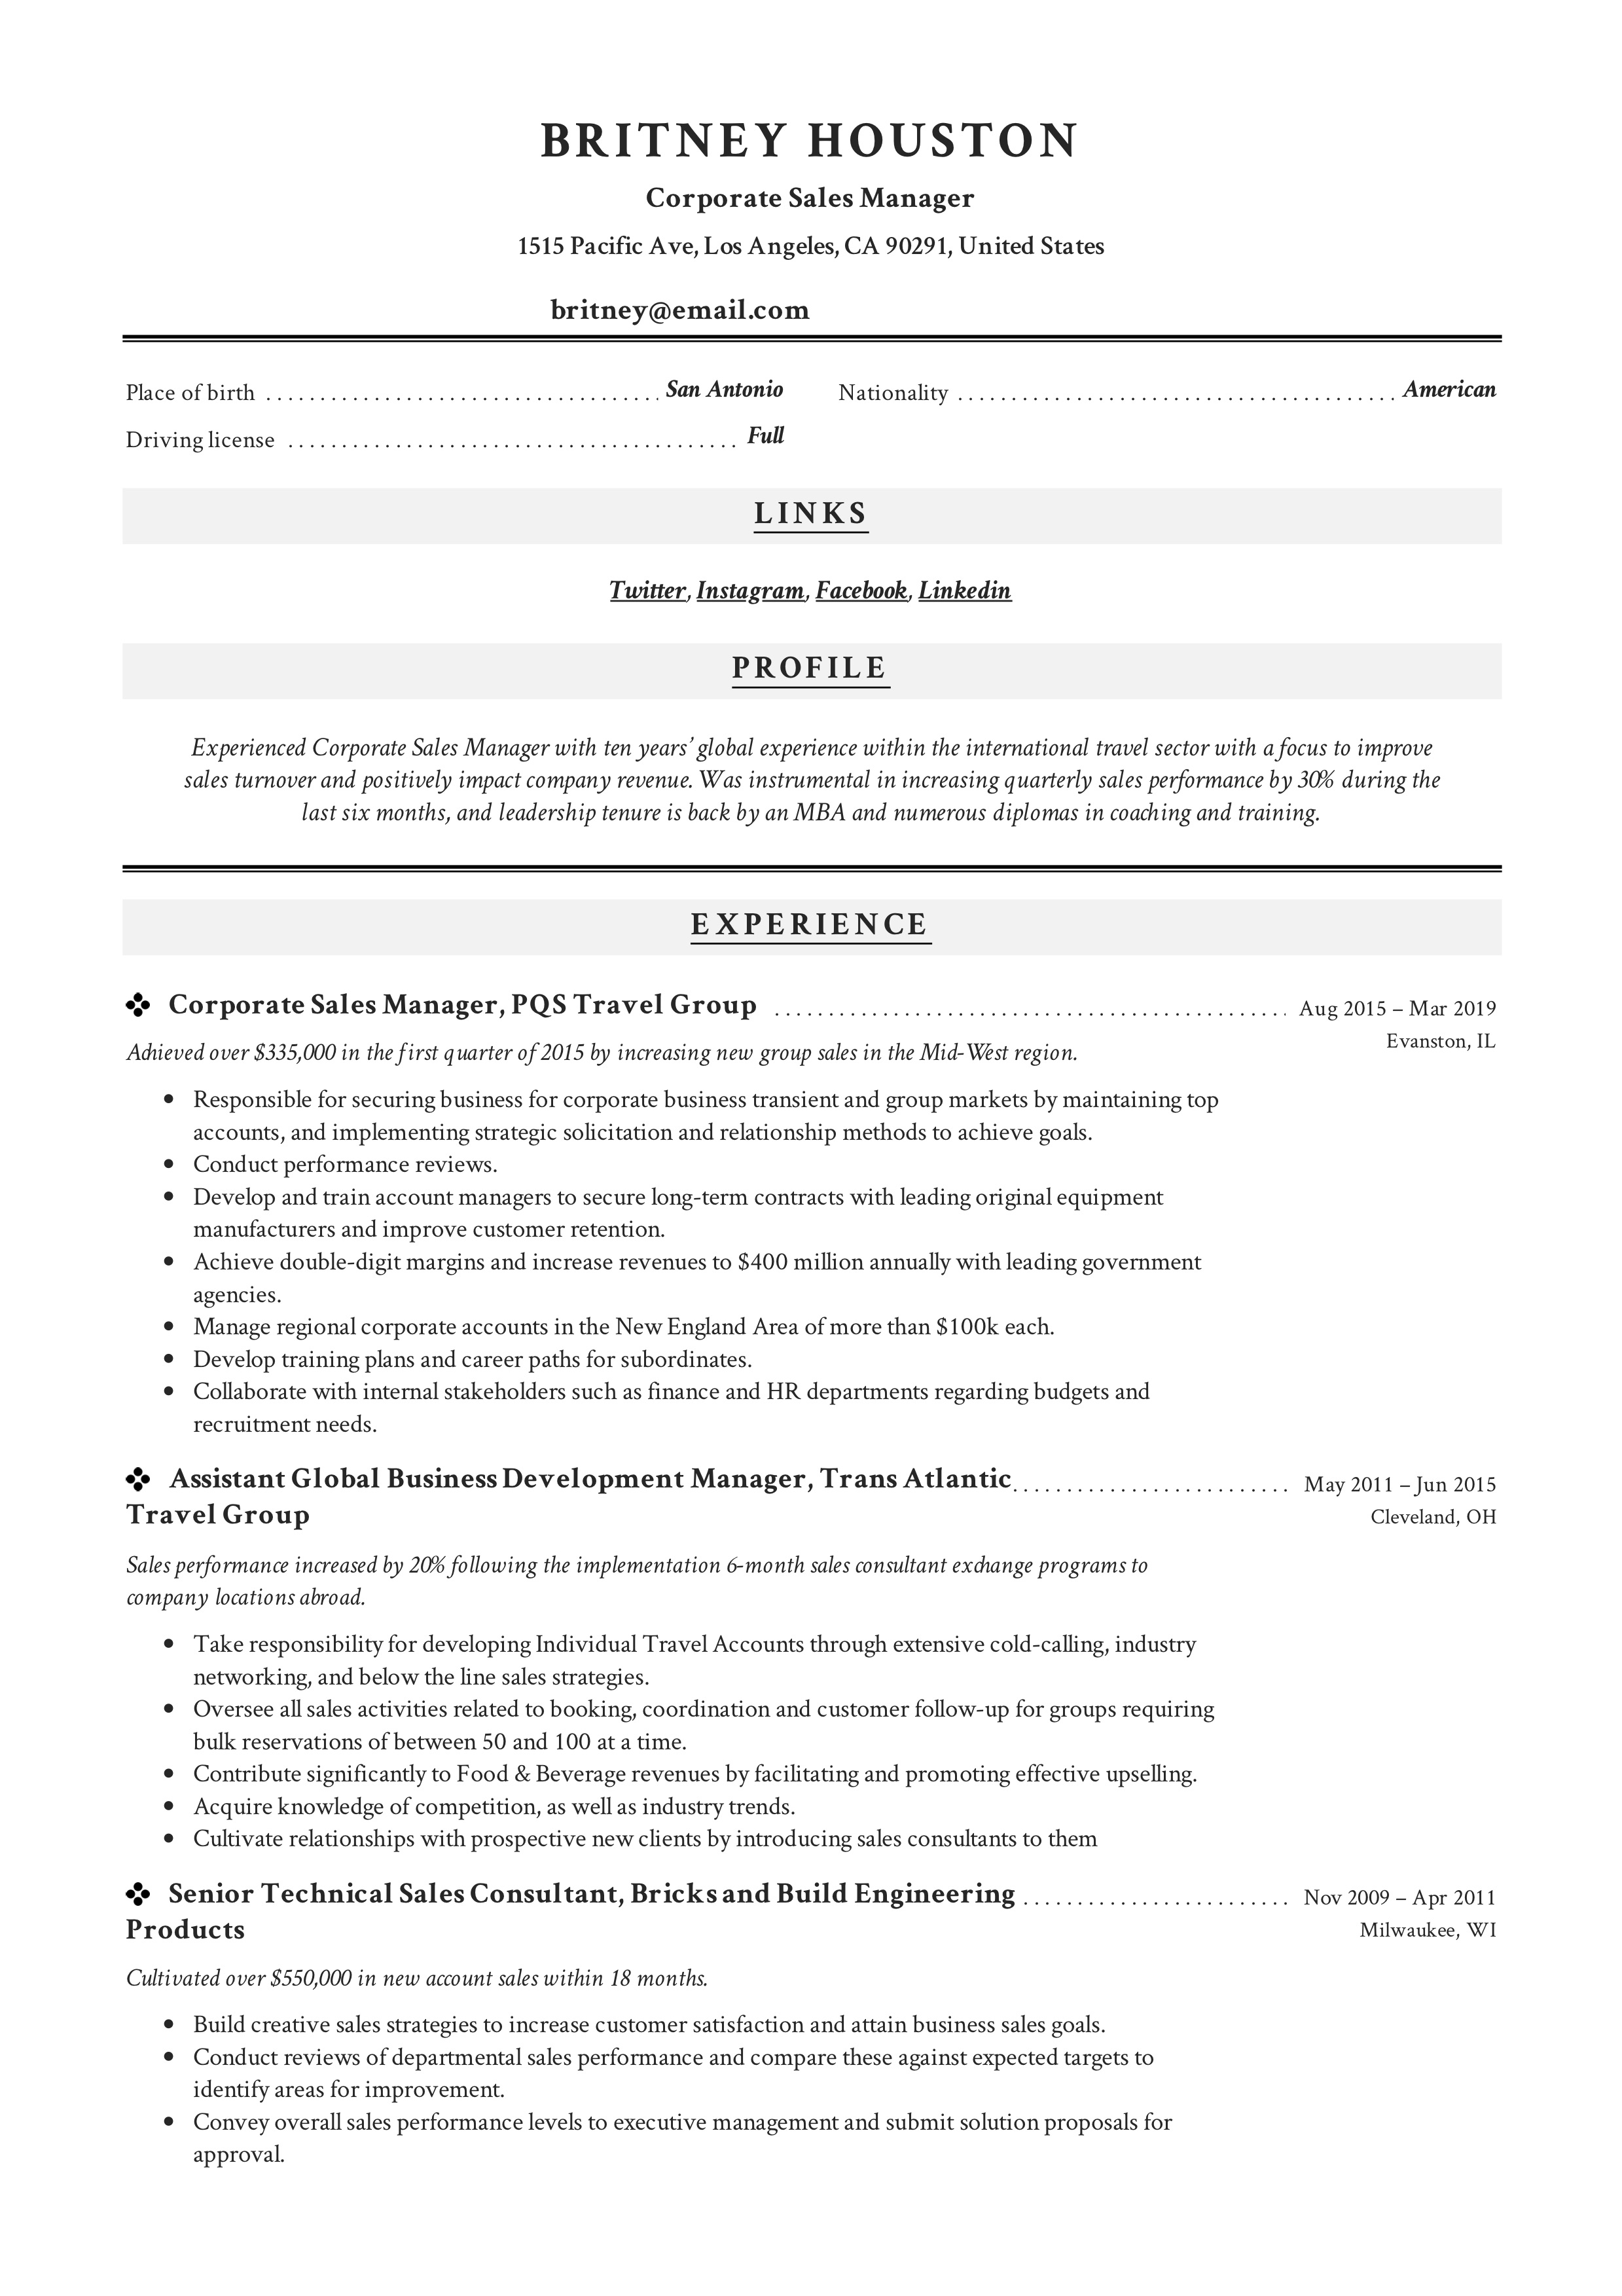 Corporate Sales Manager Professional Resume